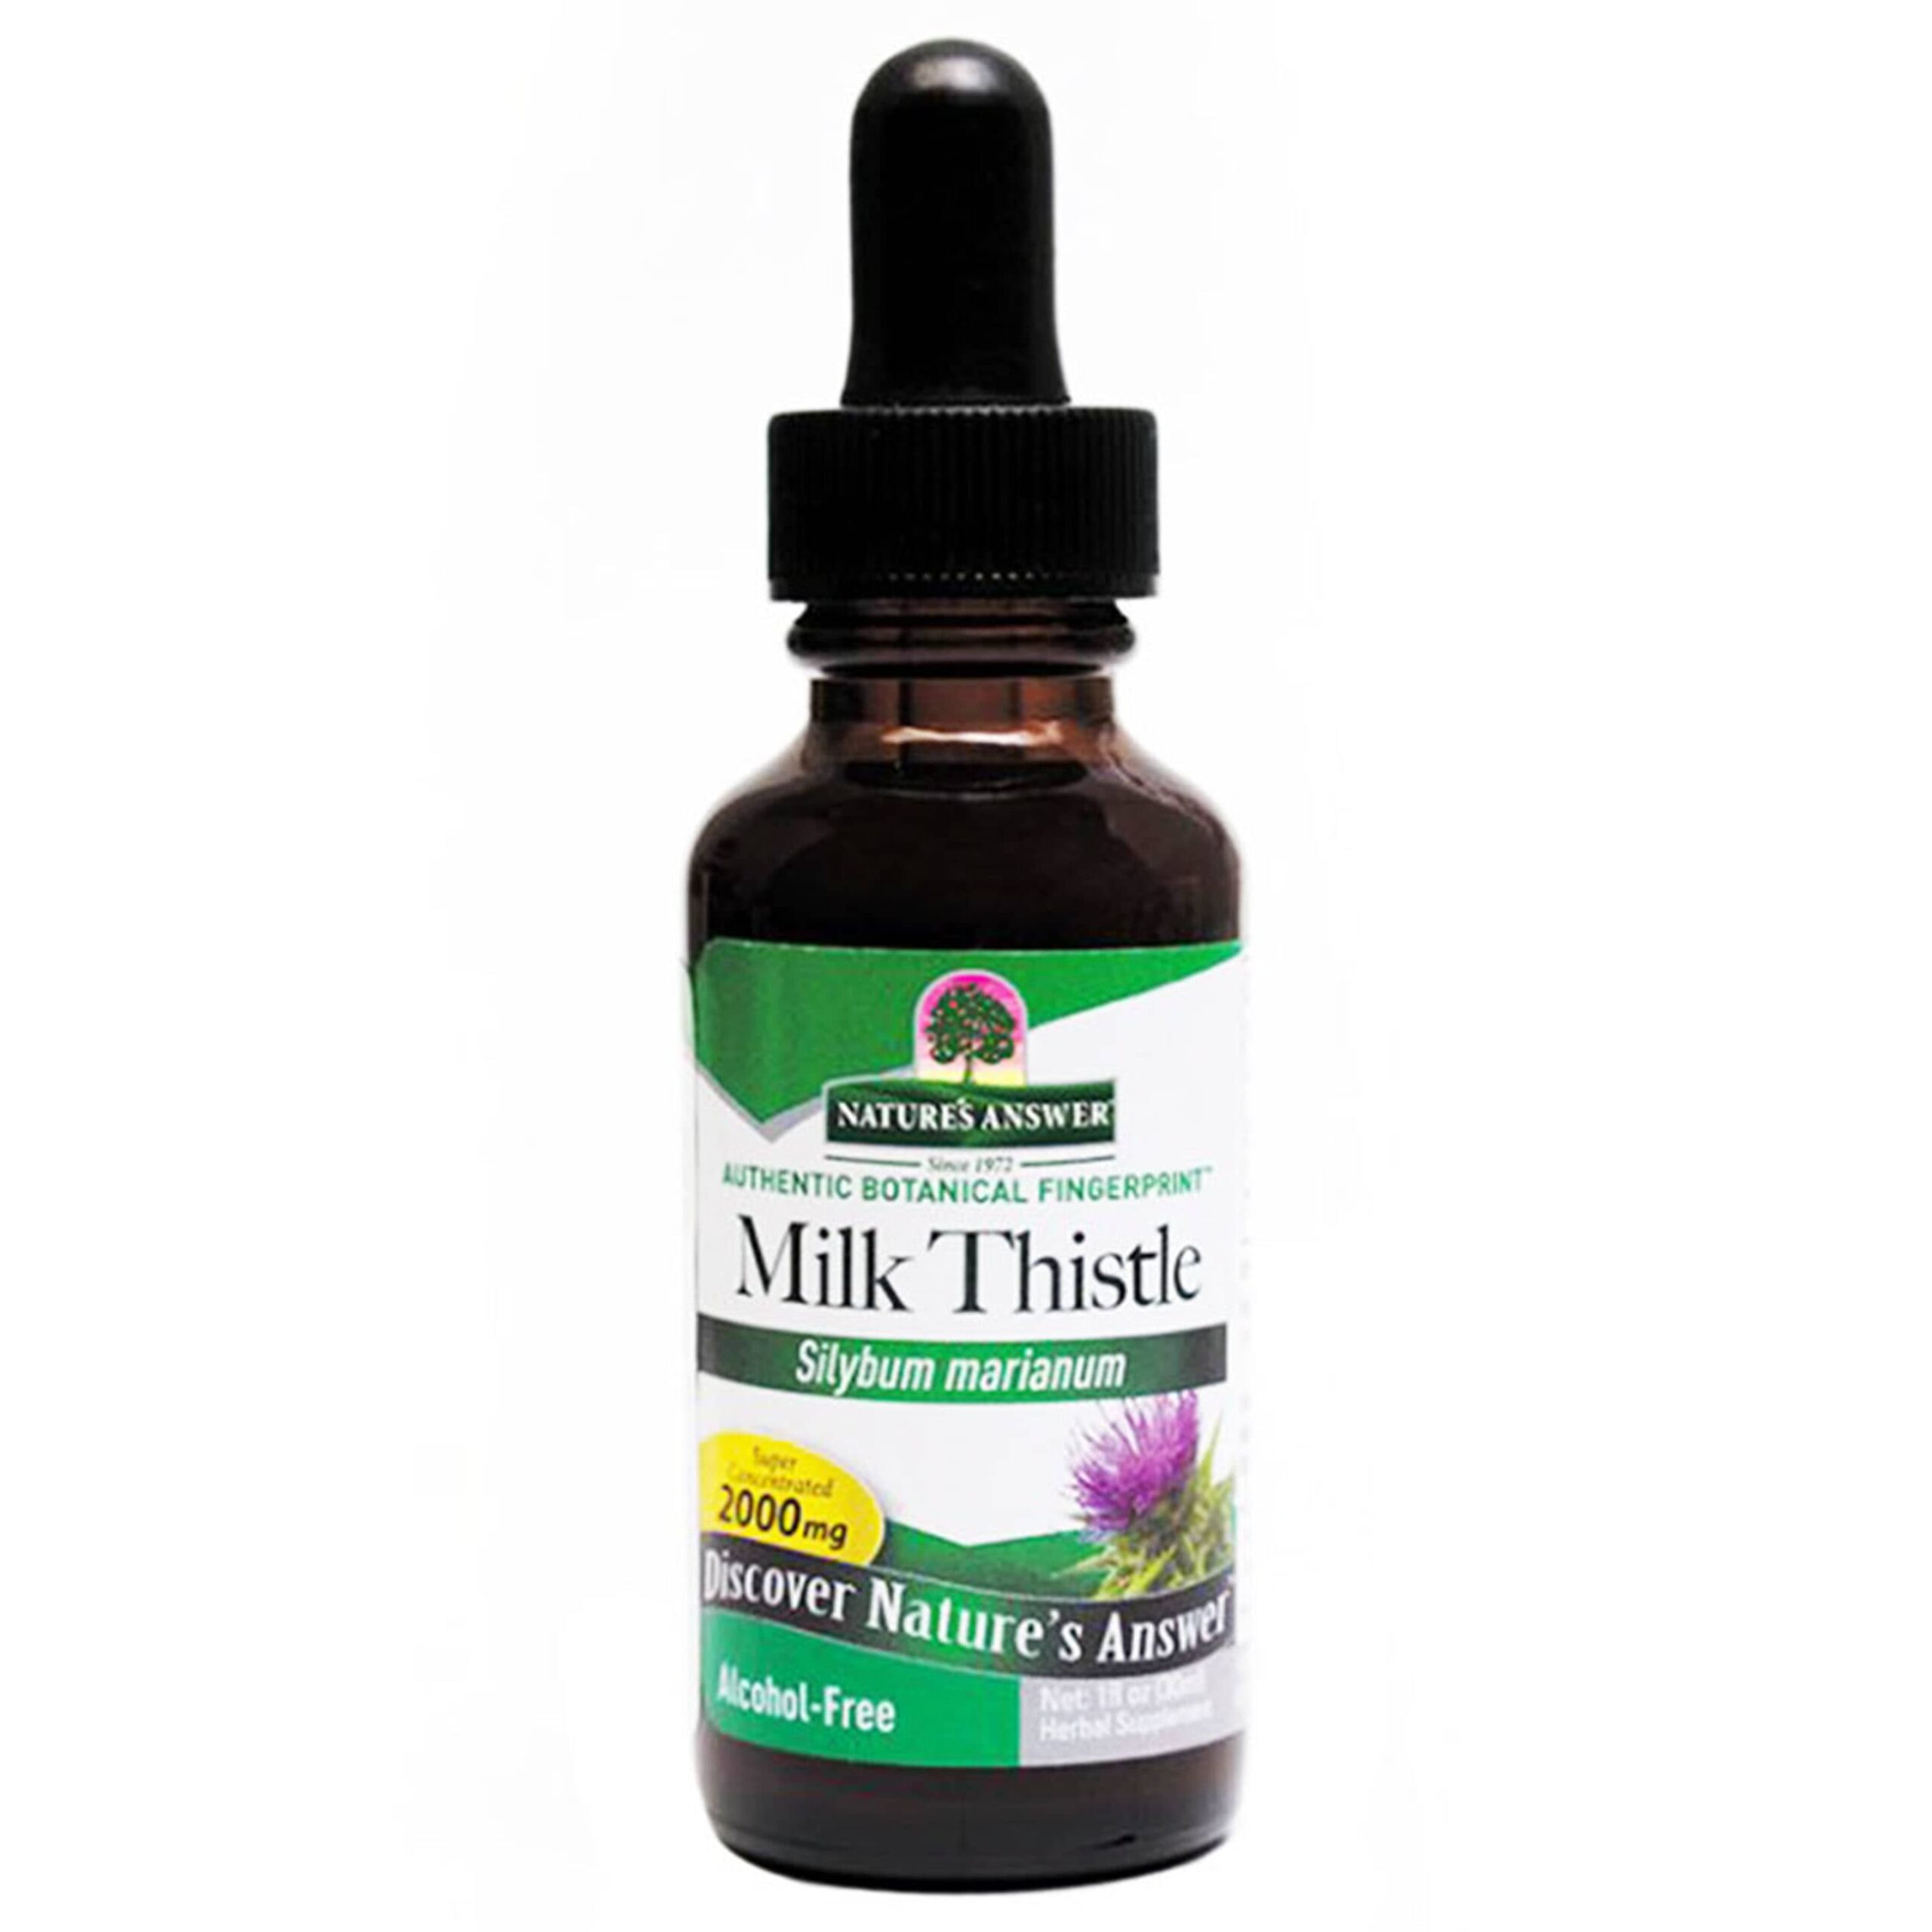 Milk Thistle Extract - Nature's Answer